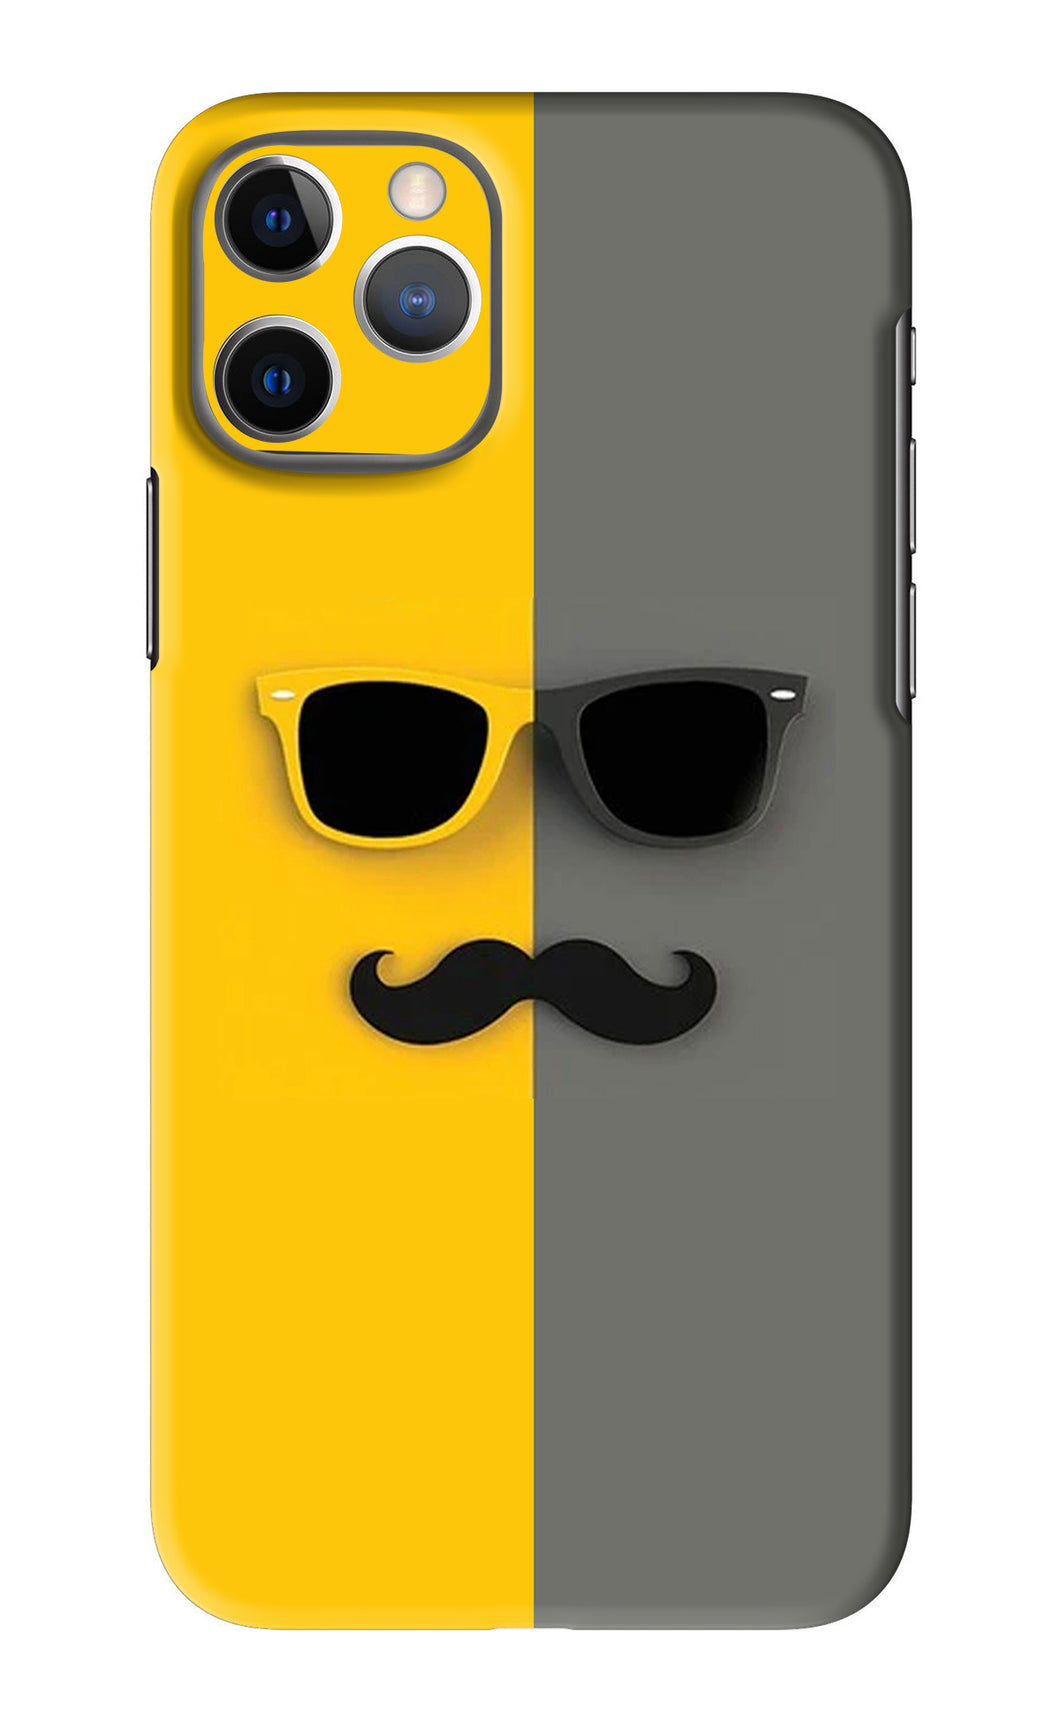 Sunglasses with Mustache iPhone 11 Pro Max Back Skin Wrap